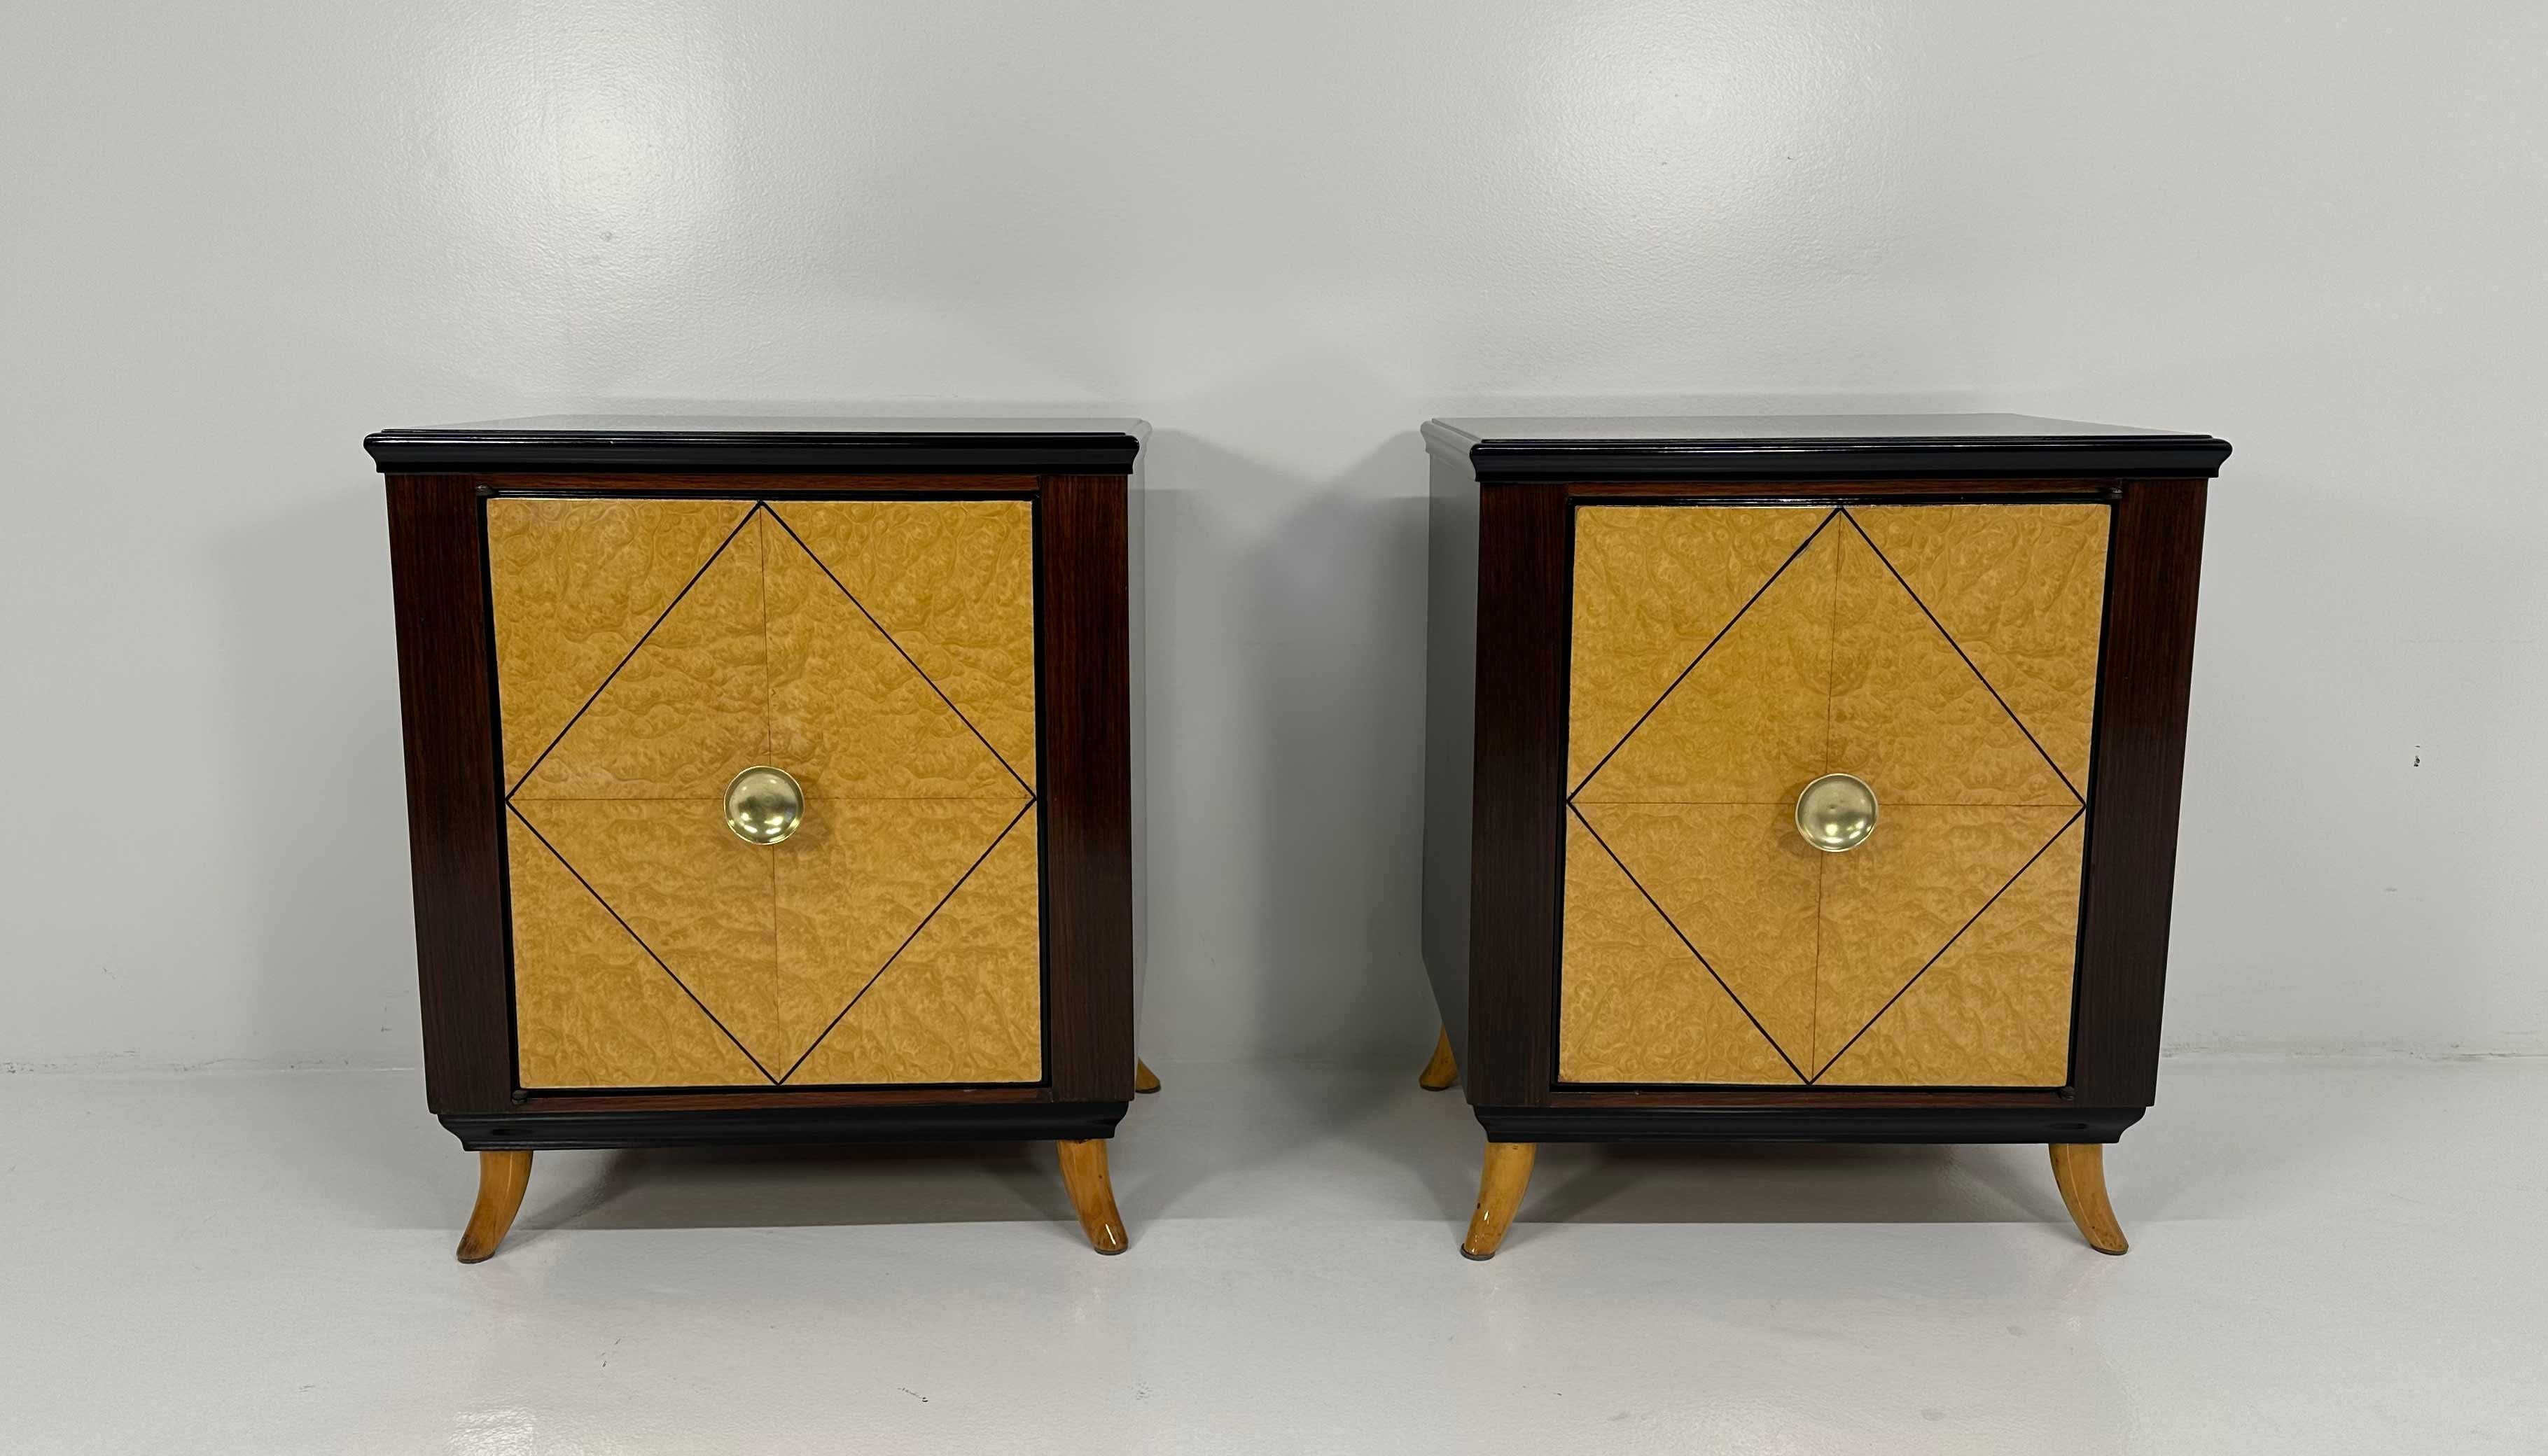 This pair of Art Deco nightstands was produced in France in the 1940s. The top and the laterals are in Macassar, the door is in maple briar, while the legs are in maple. The decorative lines on the door and the profiles are black lacquered. The